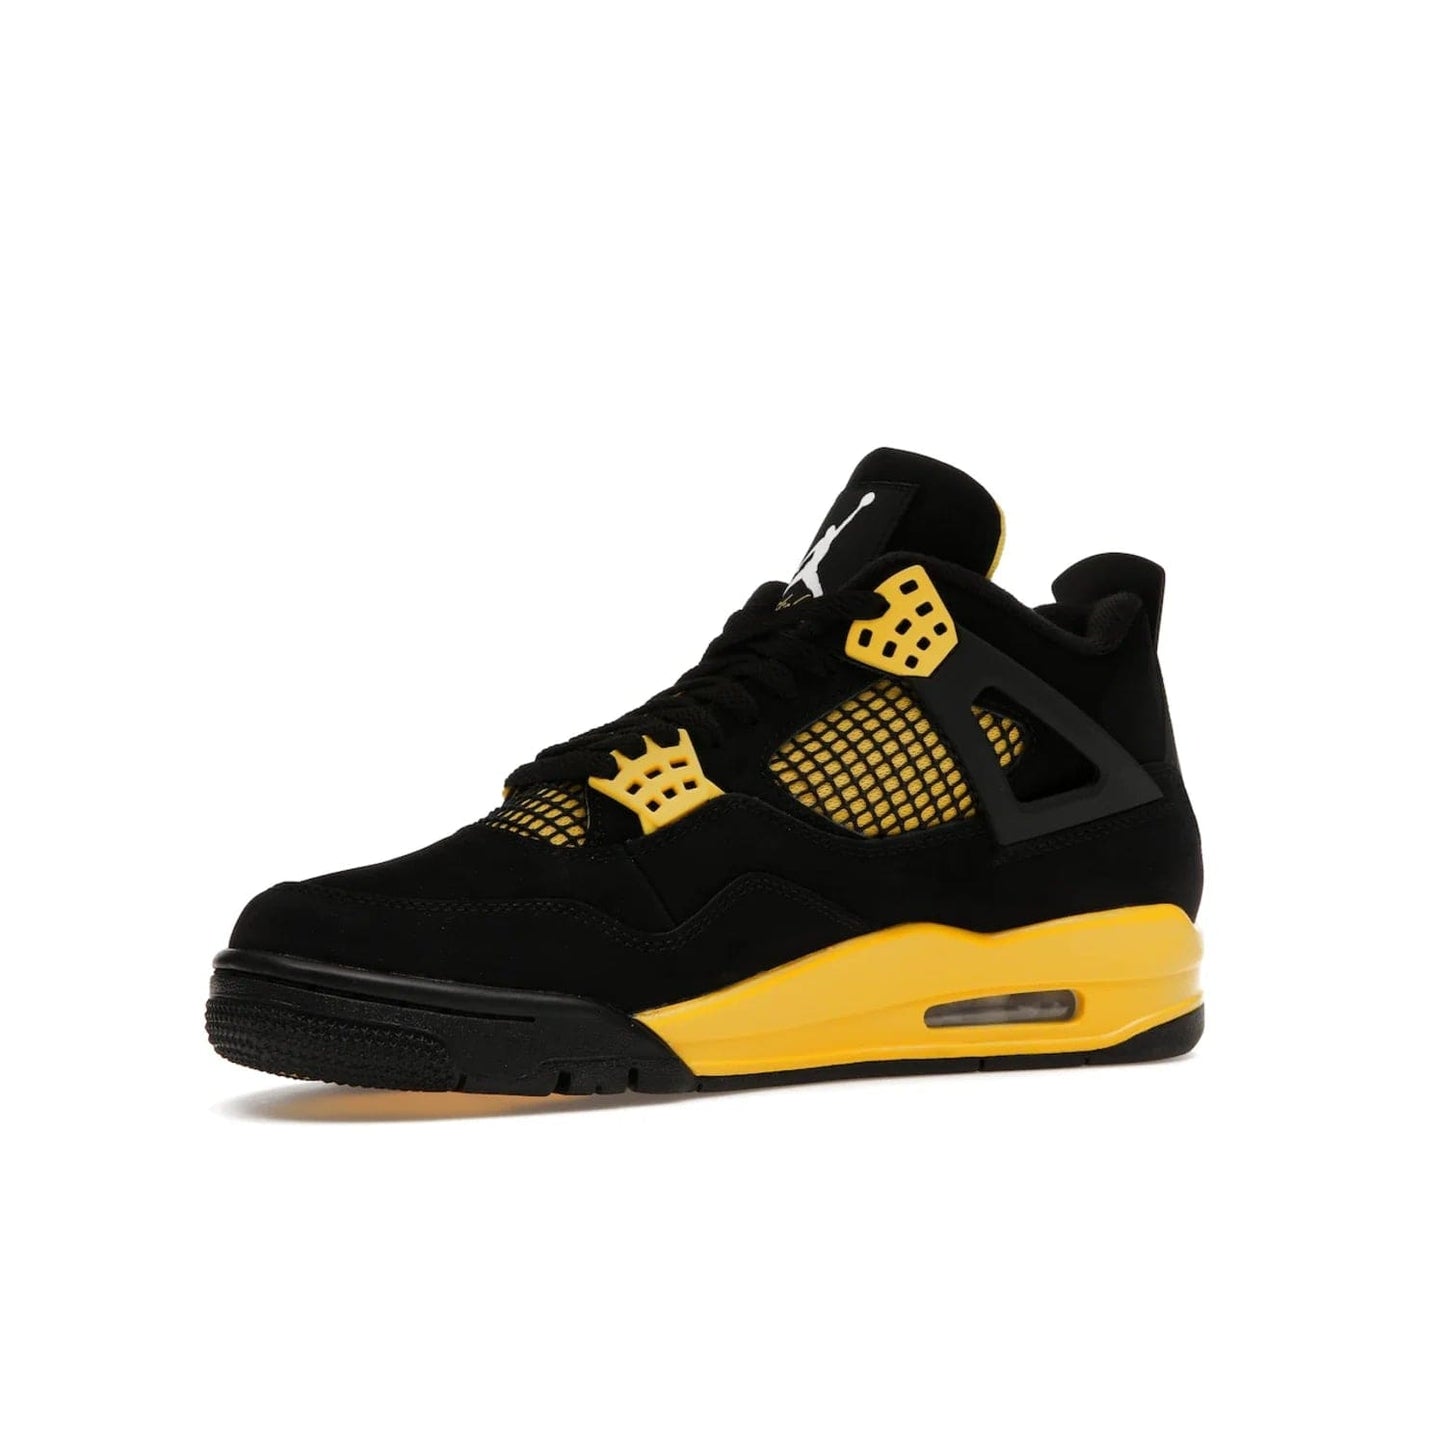 Jordan 4 Retro Thunder (2023) - Image 16 - Only at www.BallersClubKickz.com - Iconic Air Jordan 4 Retro Thunder (2023) returns with black nubuck upper and Tour Yellow details. Featuring Jumpman logo on heel tab, tongue and insoles. Dropping May 13th, 2023.